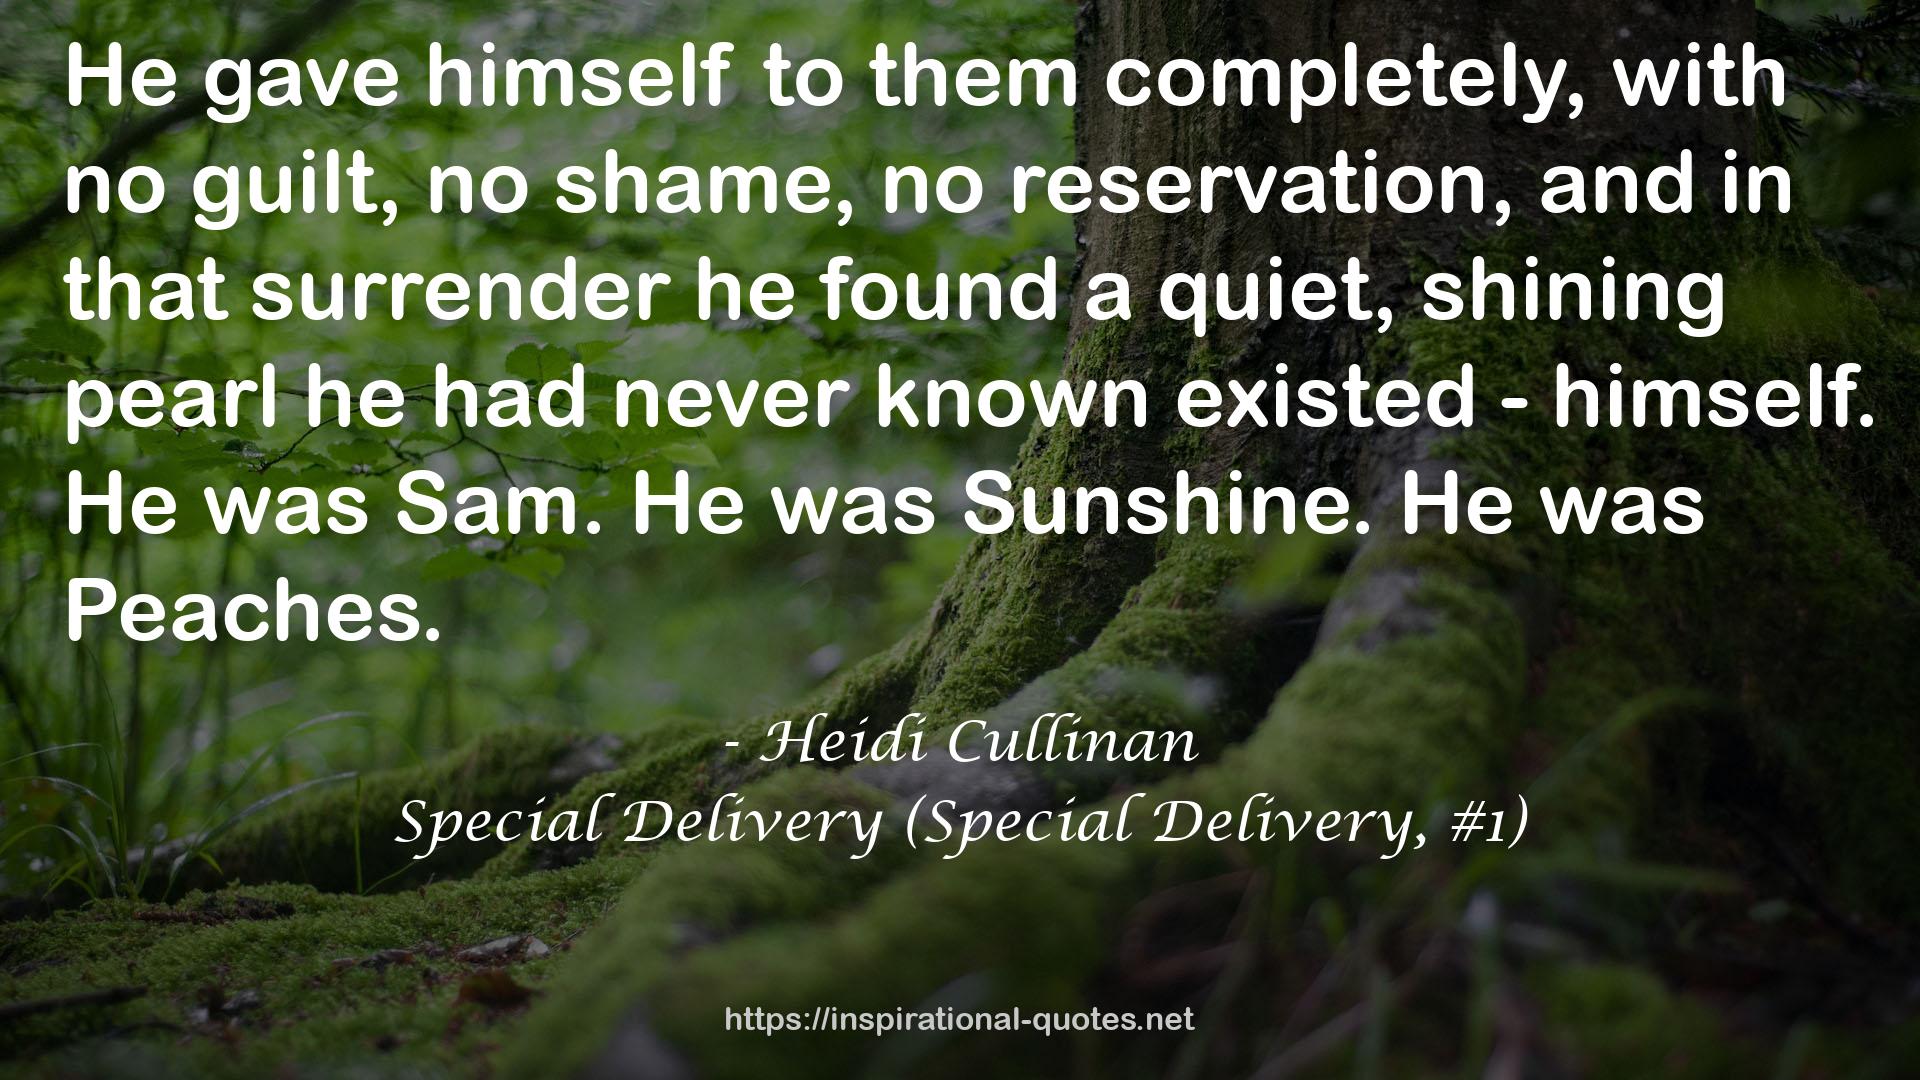 Special Delivery (Special Delivery, #1) QUOTES